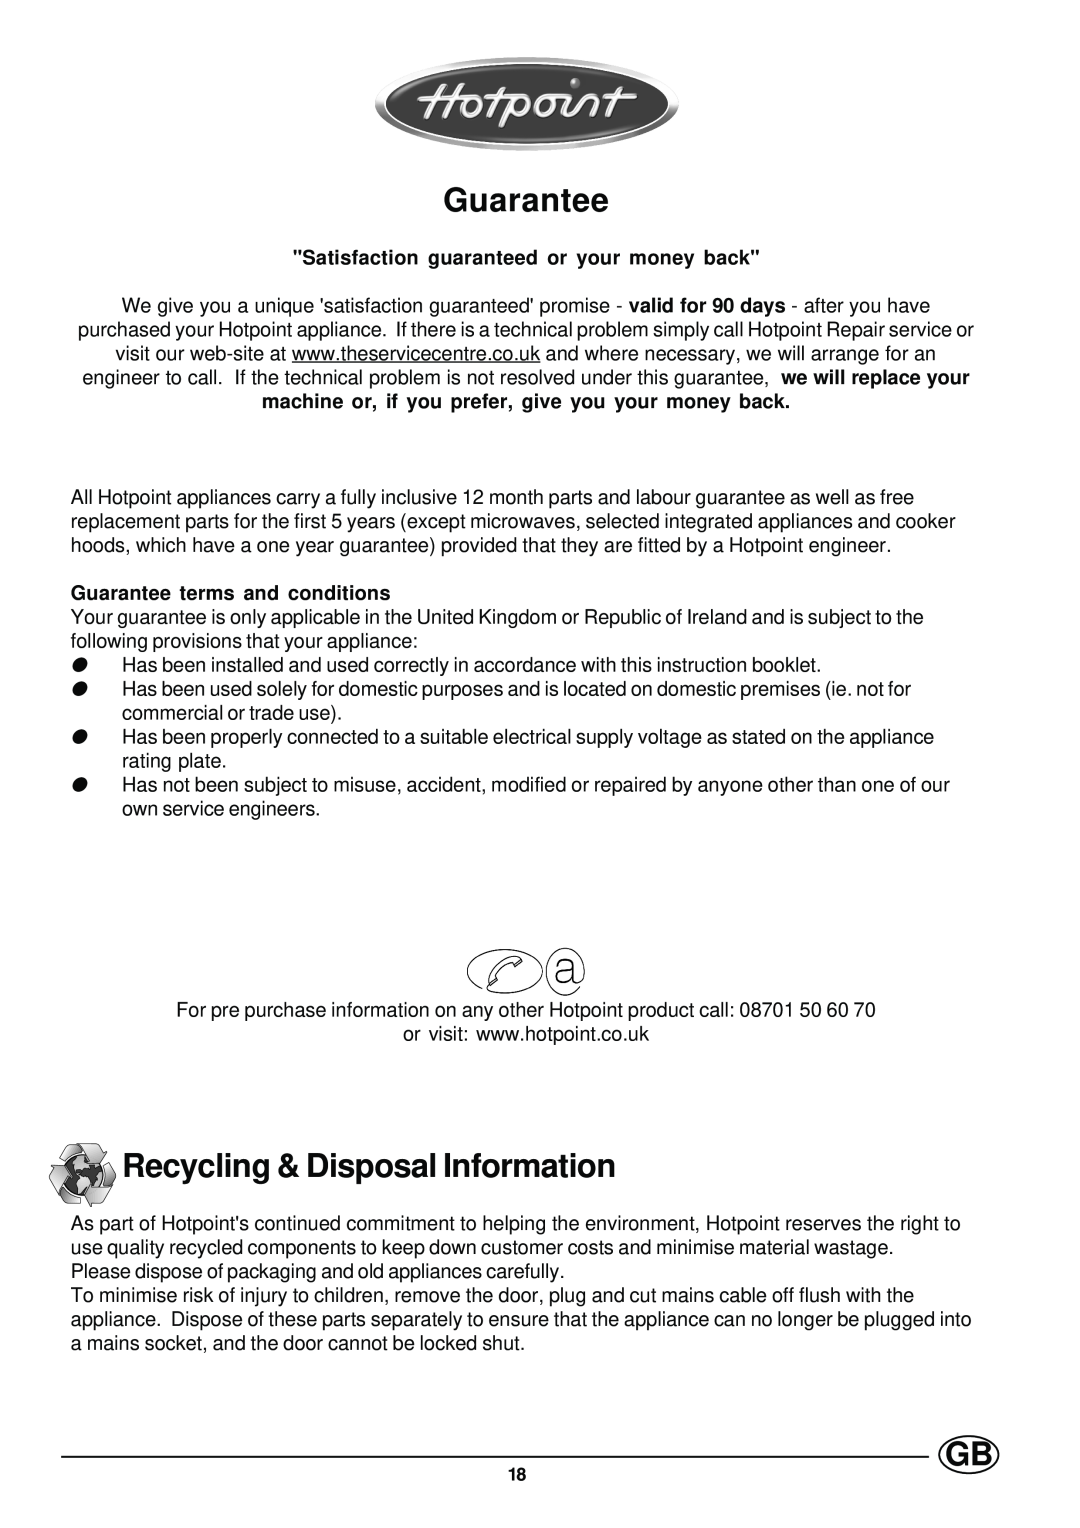 Hotpoint HM311i manual Guarantee, Recycling & Disposal Information, Satisfaction guaranteed or your money back 